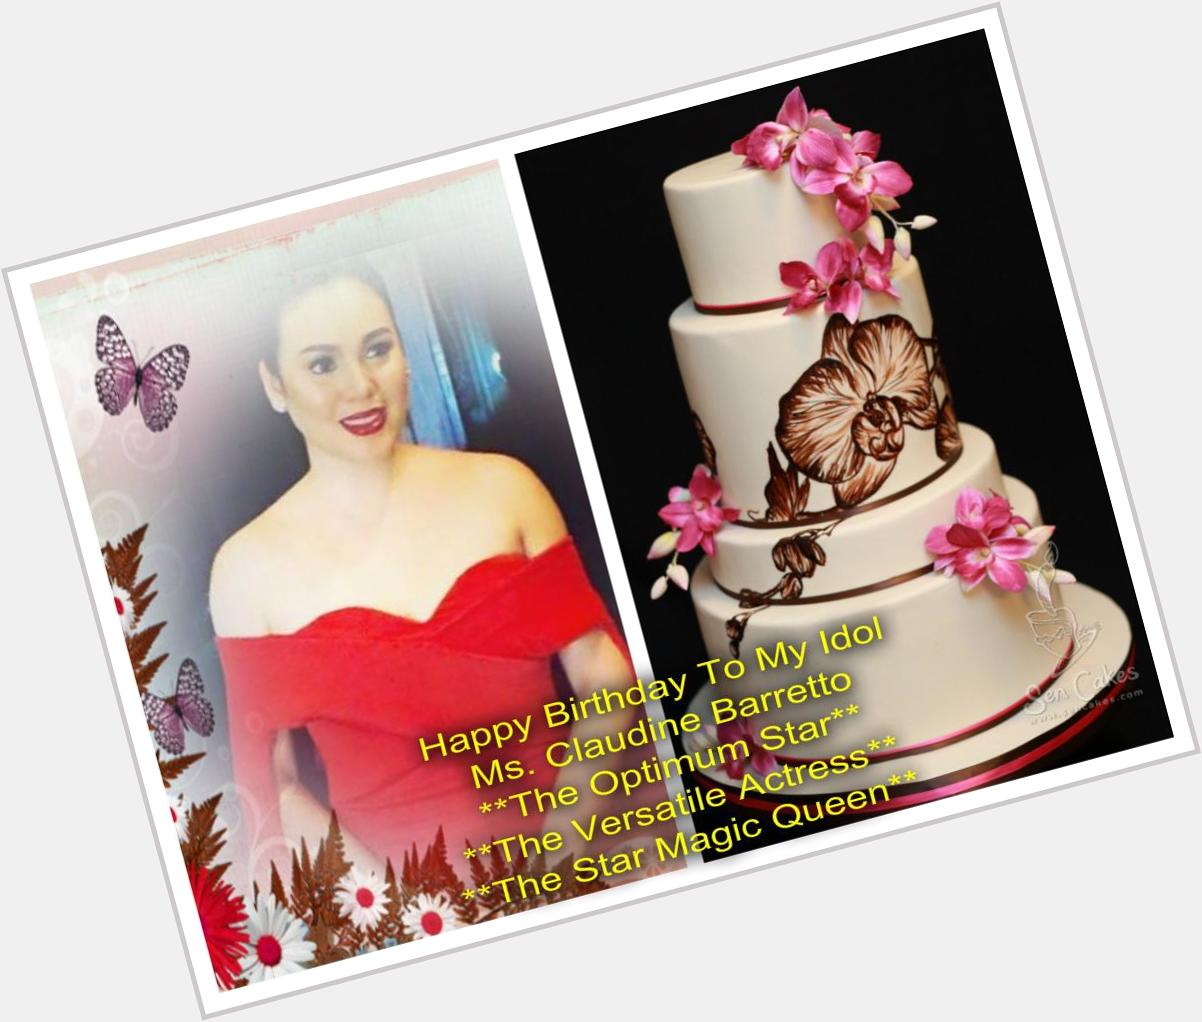 WELCOME BACK AND HAPPY BIRTHDAY IDOL!THE OPTIMUM STAR - MS.CLAUDINE BARRETTO!  